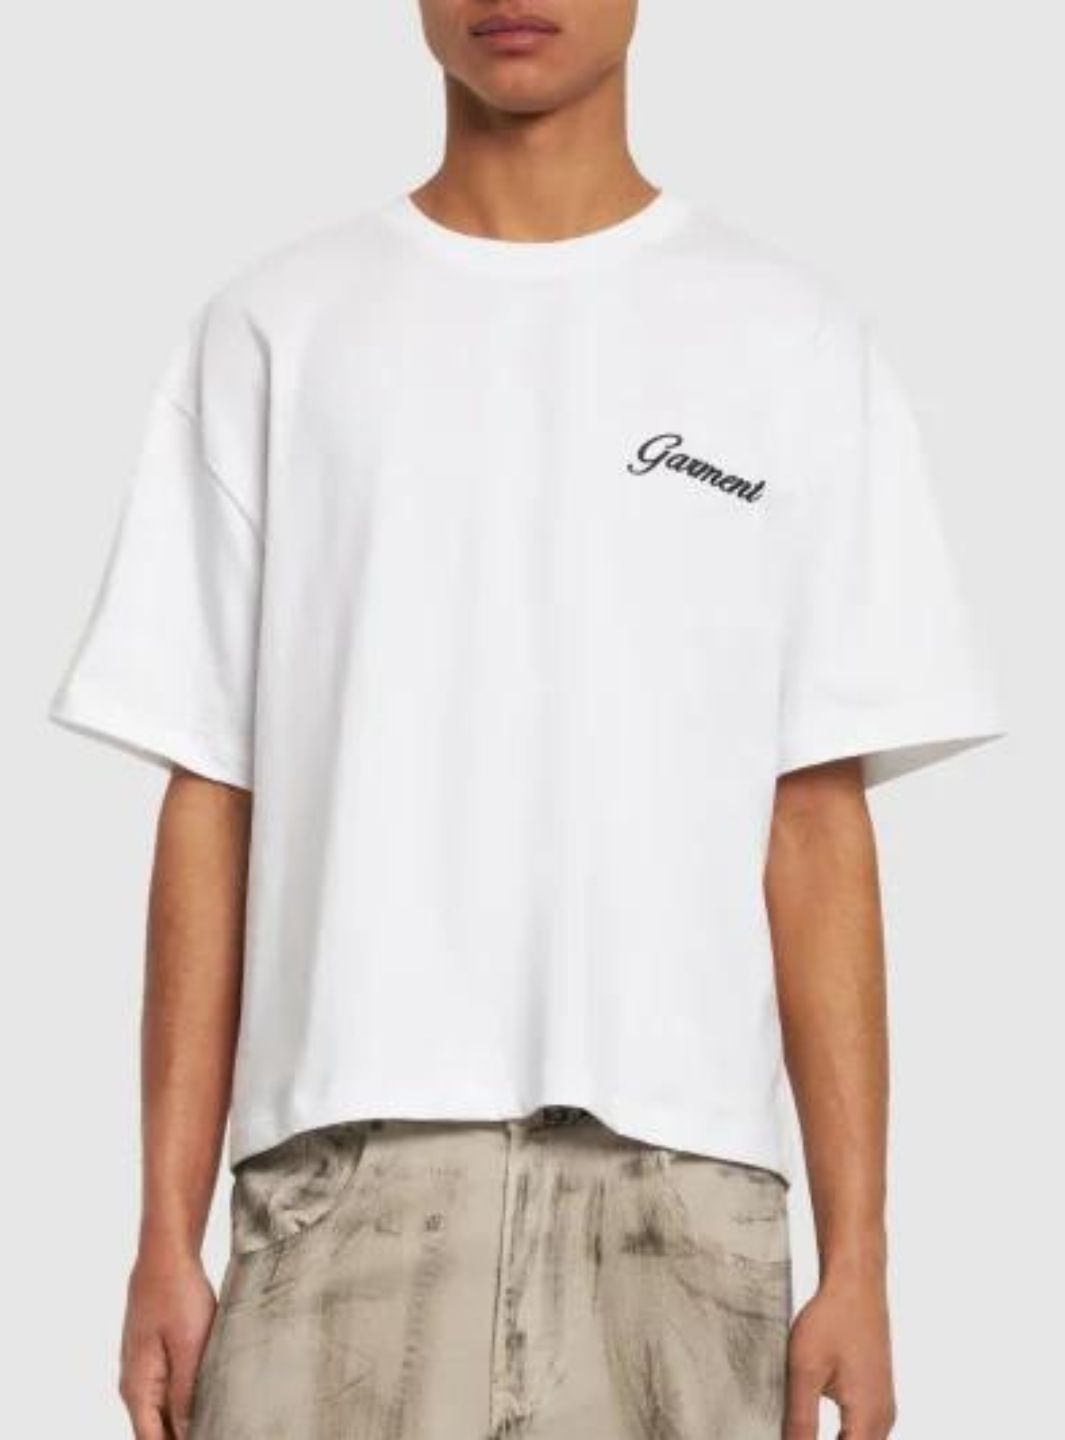 Garment-Workshop T-shirt If You Know You Know White 